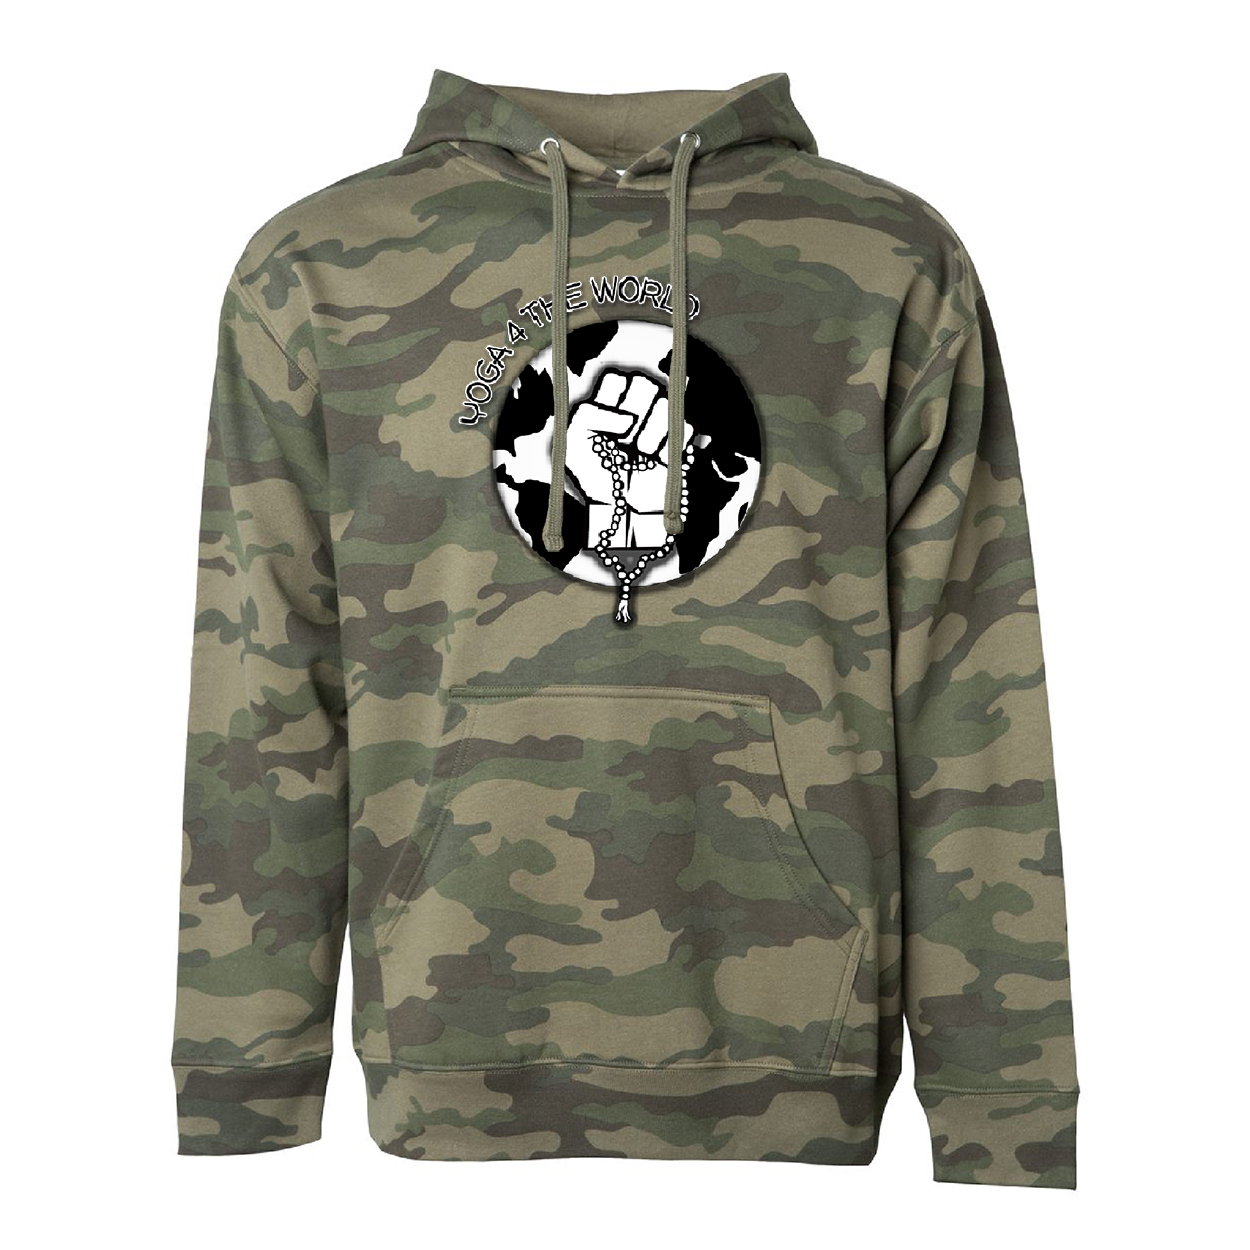 Yoga 4 the world Forest_Camo hoodie